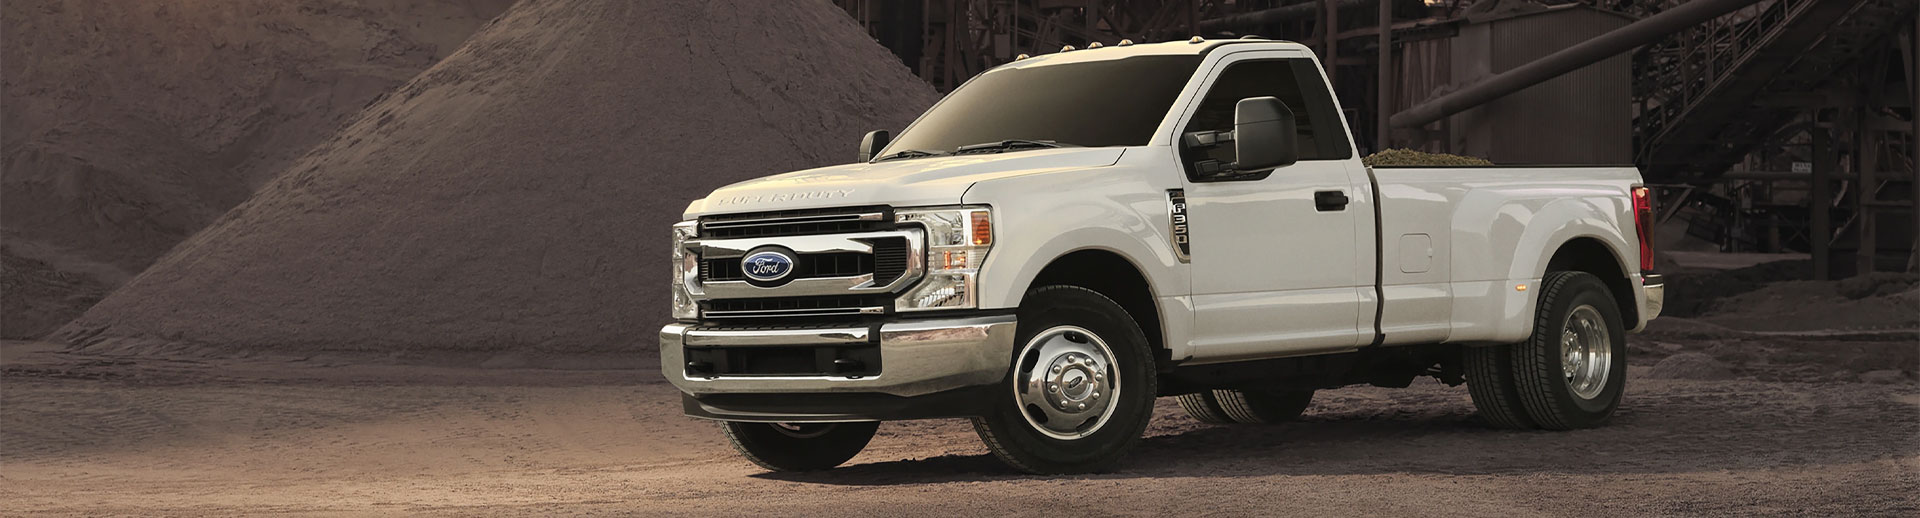 2022 Ford F-350 Lifestyle Photo